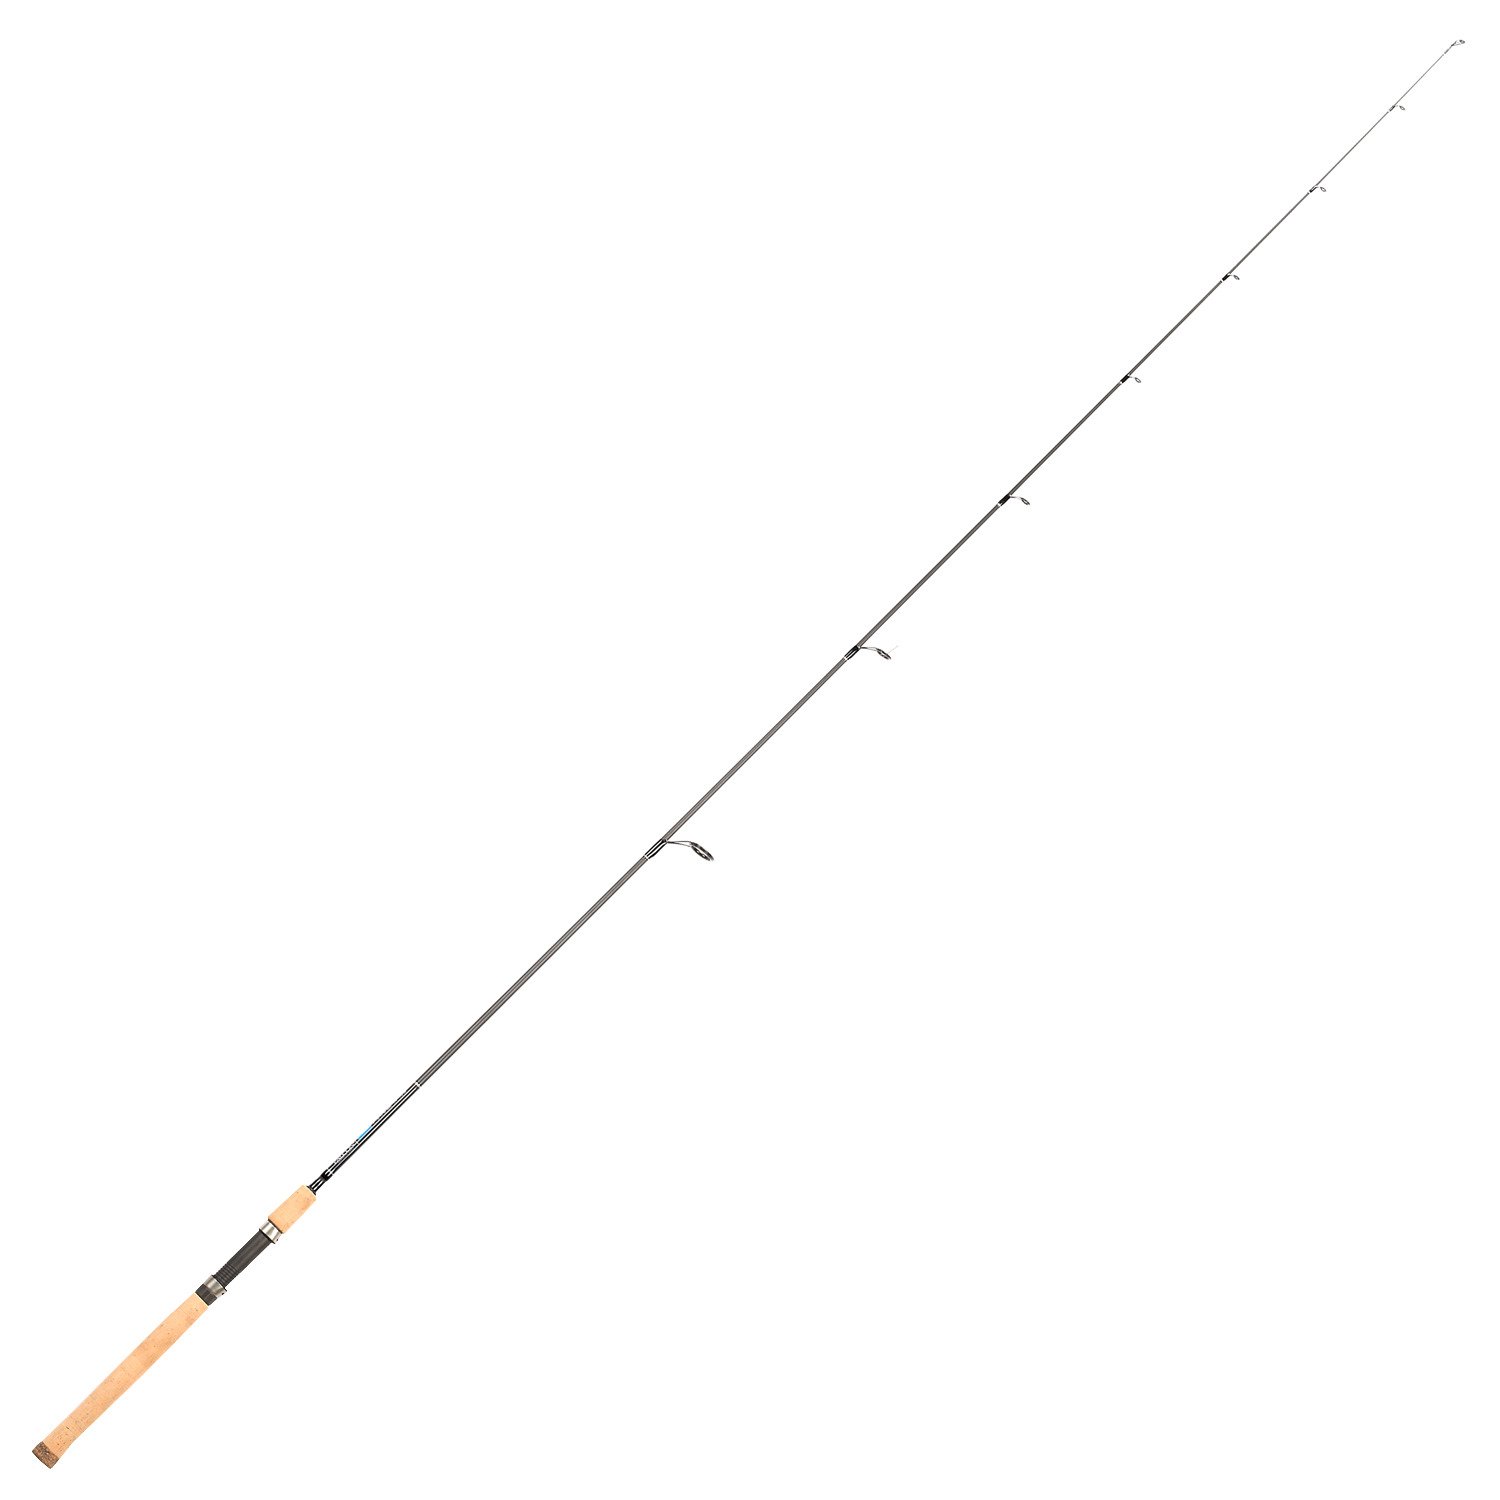 Falcon HD 7' Freshwater/Saltwater Spinning Rod